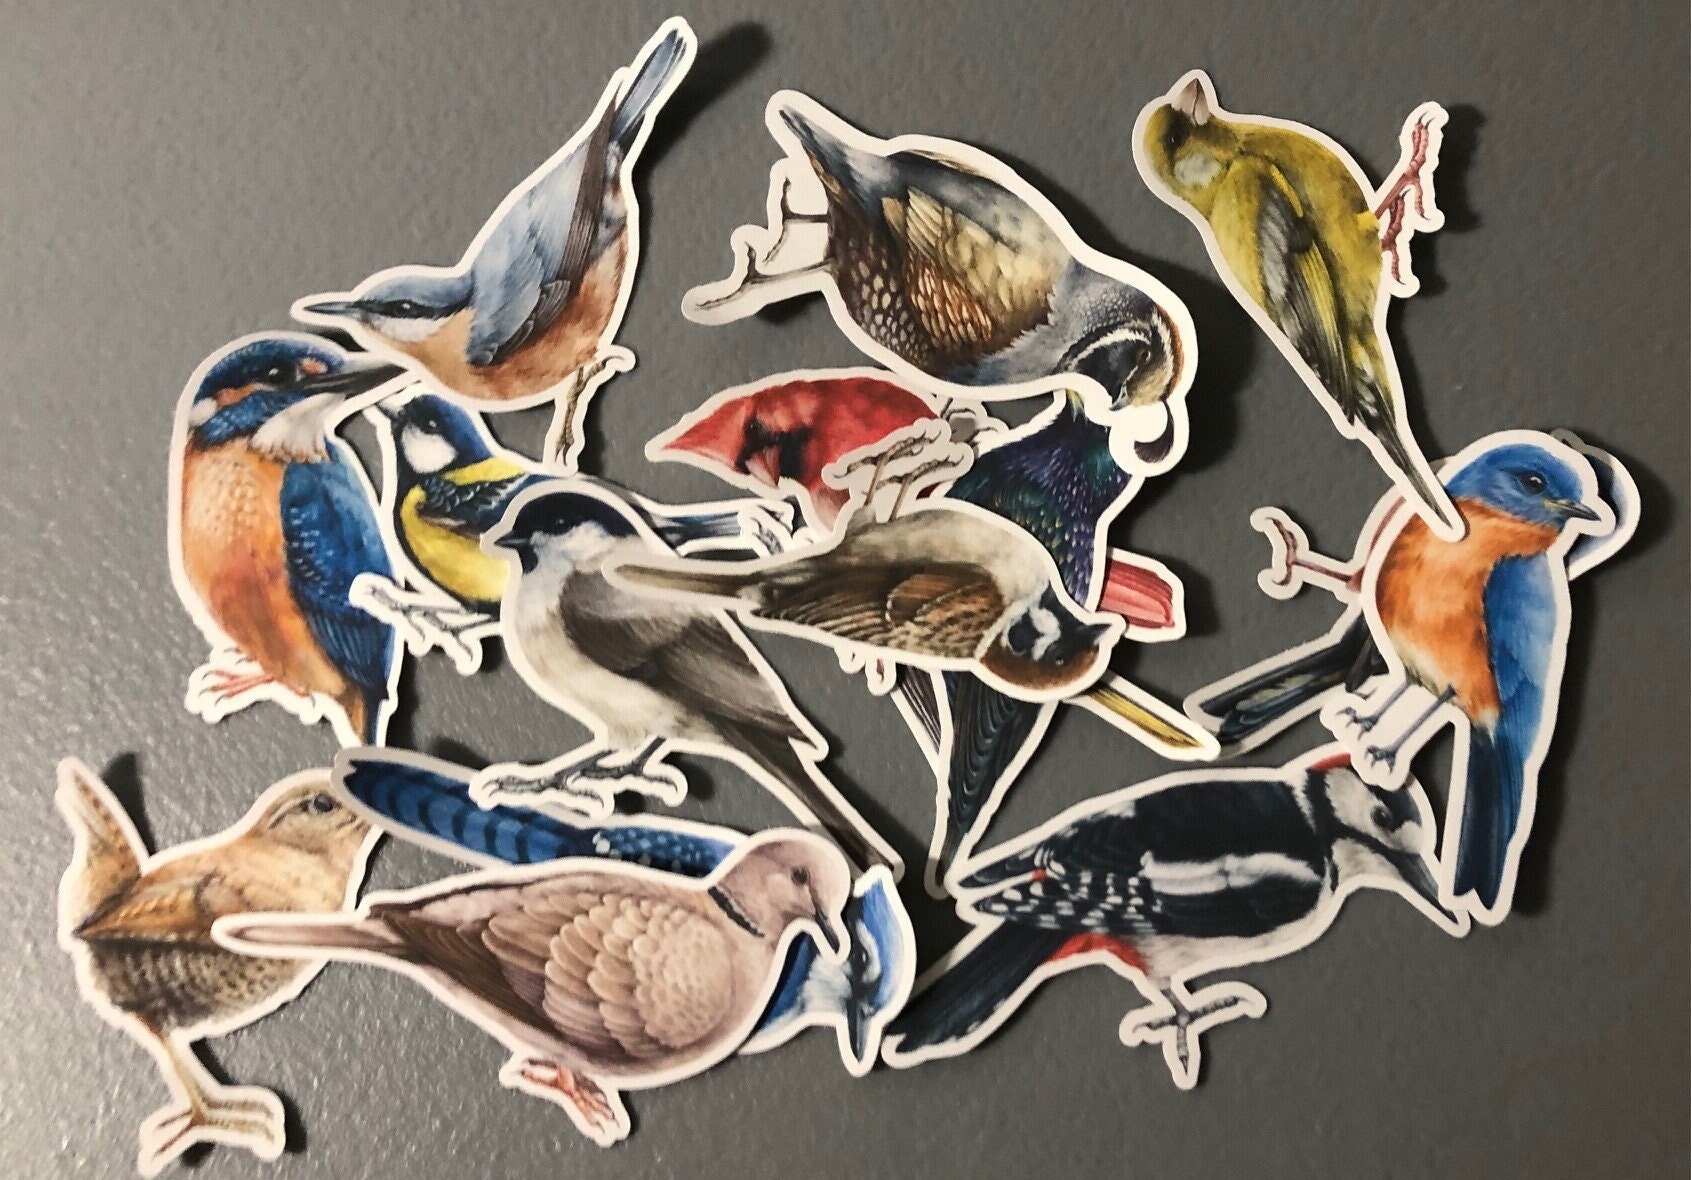 12 Wholesale Bird Stickers - at 